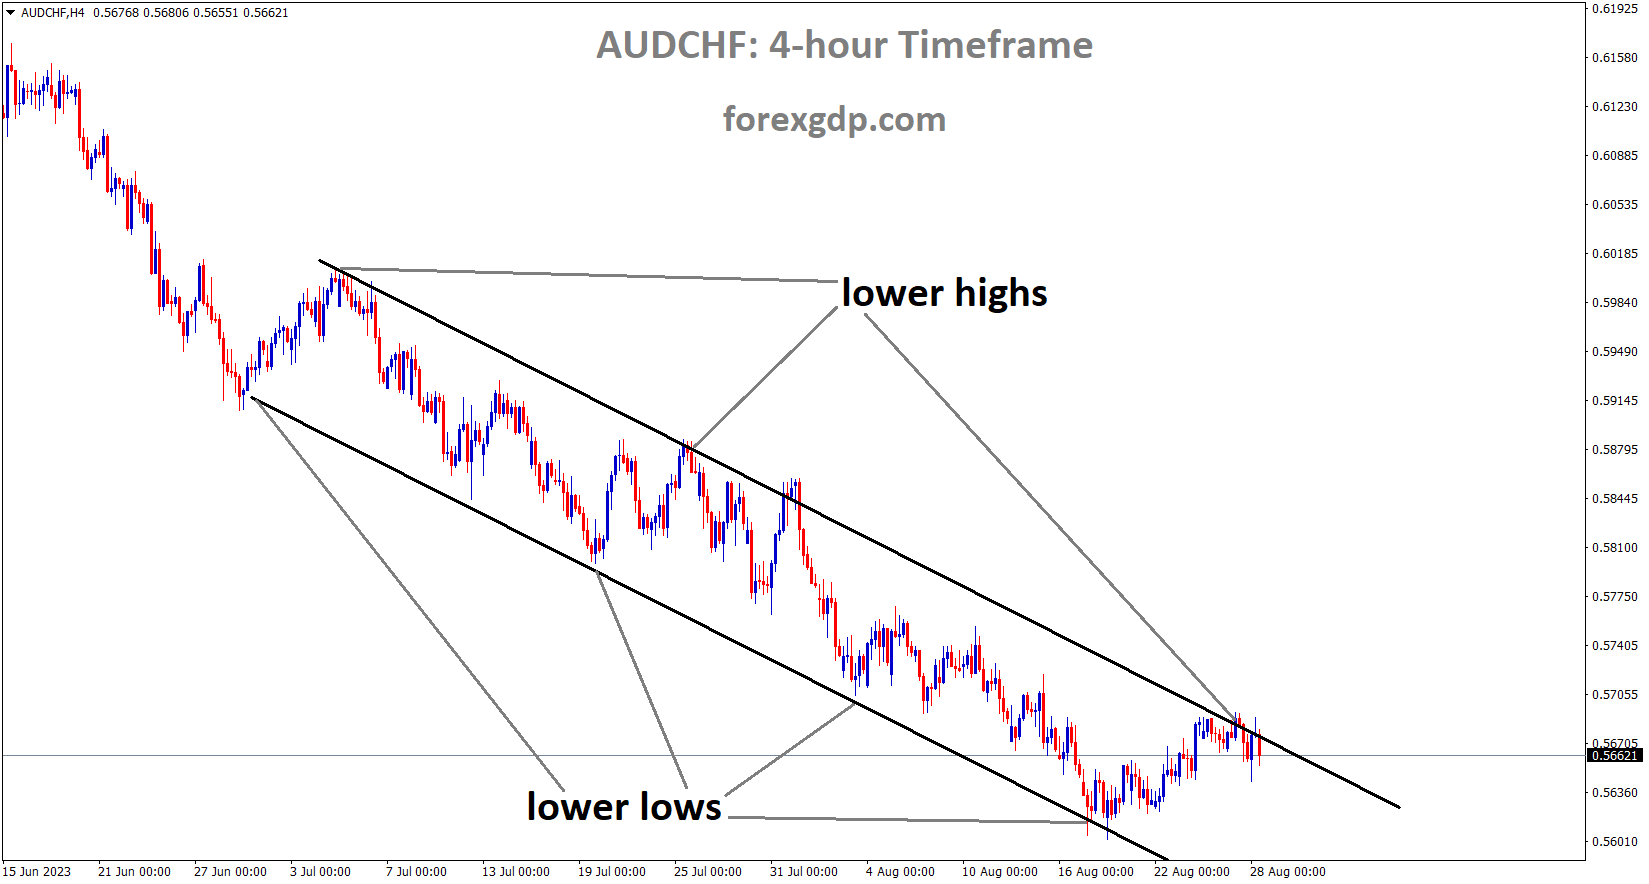 AUDCHF is moving in the Descending channel and the market has reached the lower high area of the channel